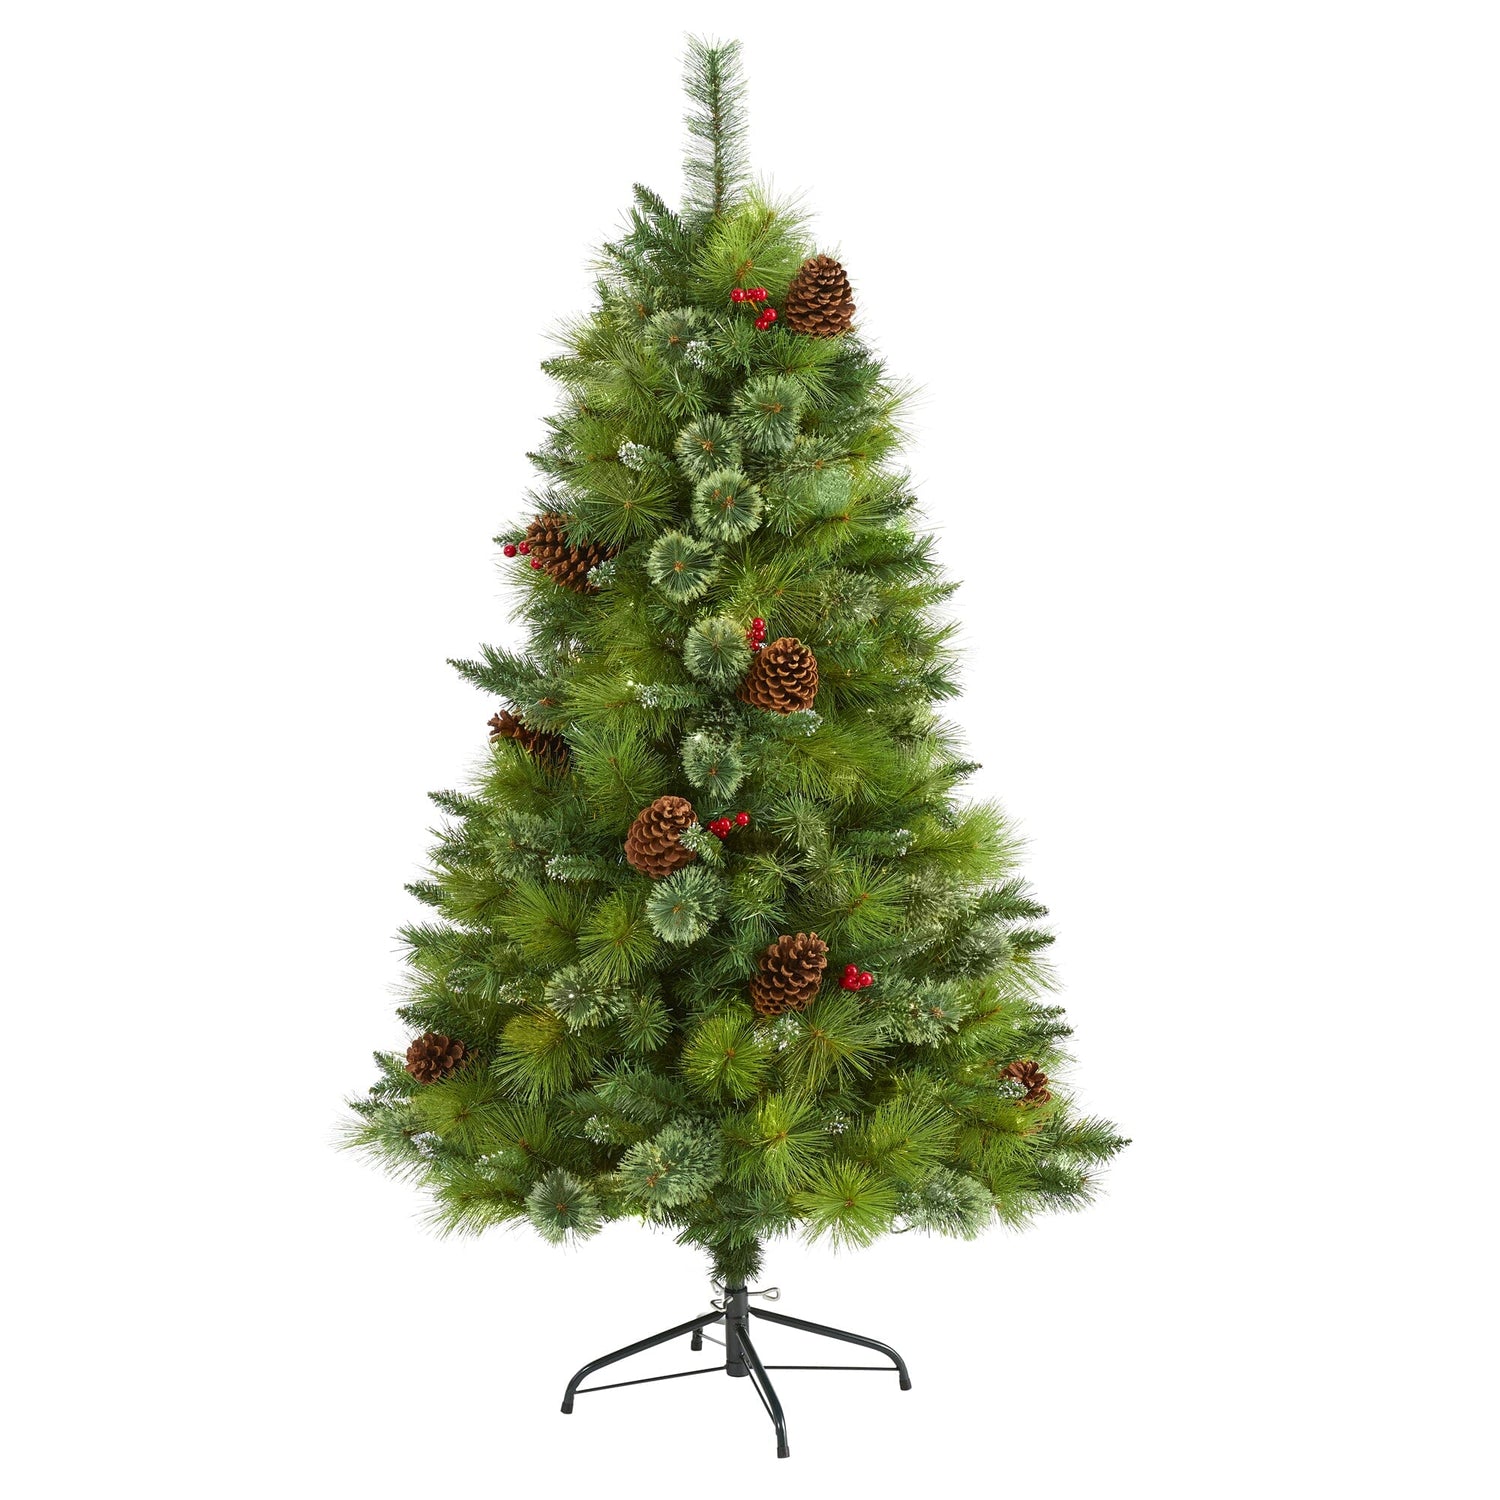 5’ Montana Mixed Pine Artificial Christmas Tree with Pine Cones, Berries and 510 Bendable Branches